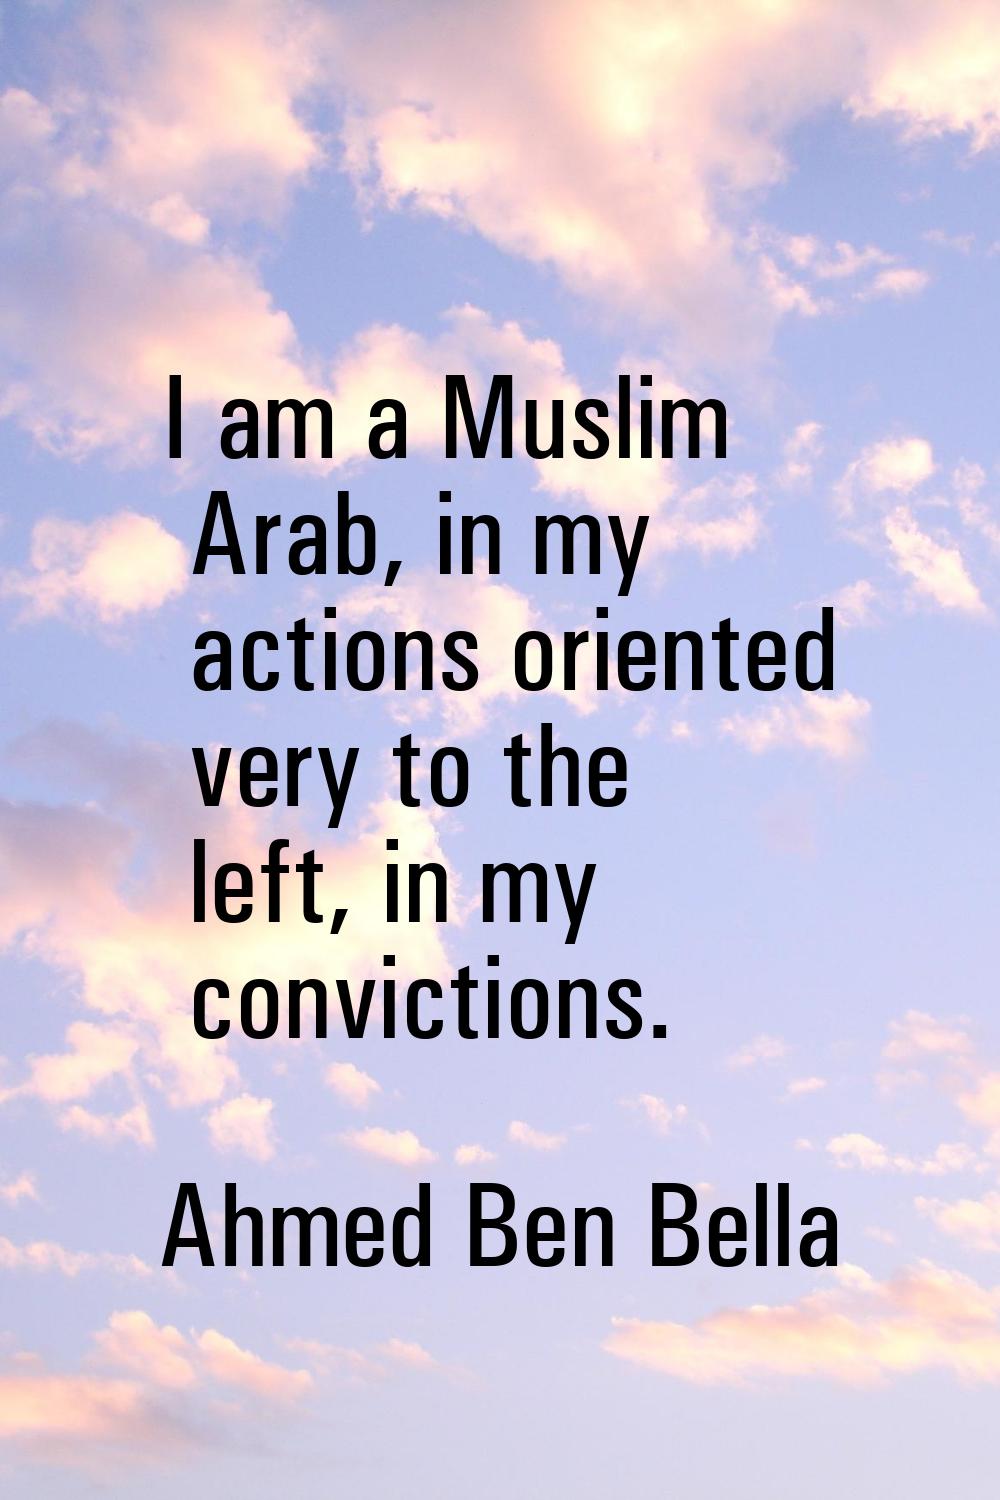 I am a Muslim Arab, in my actions oriented very to the left, in my convictions.